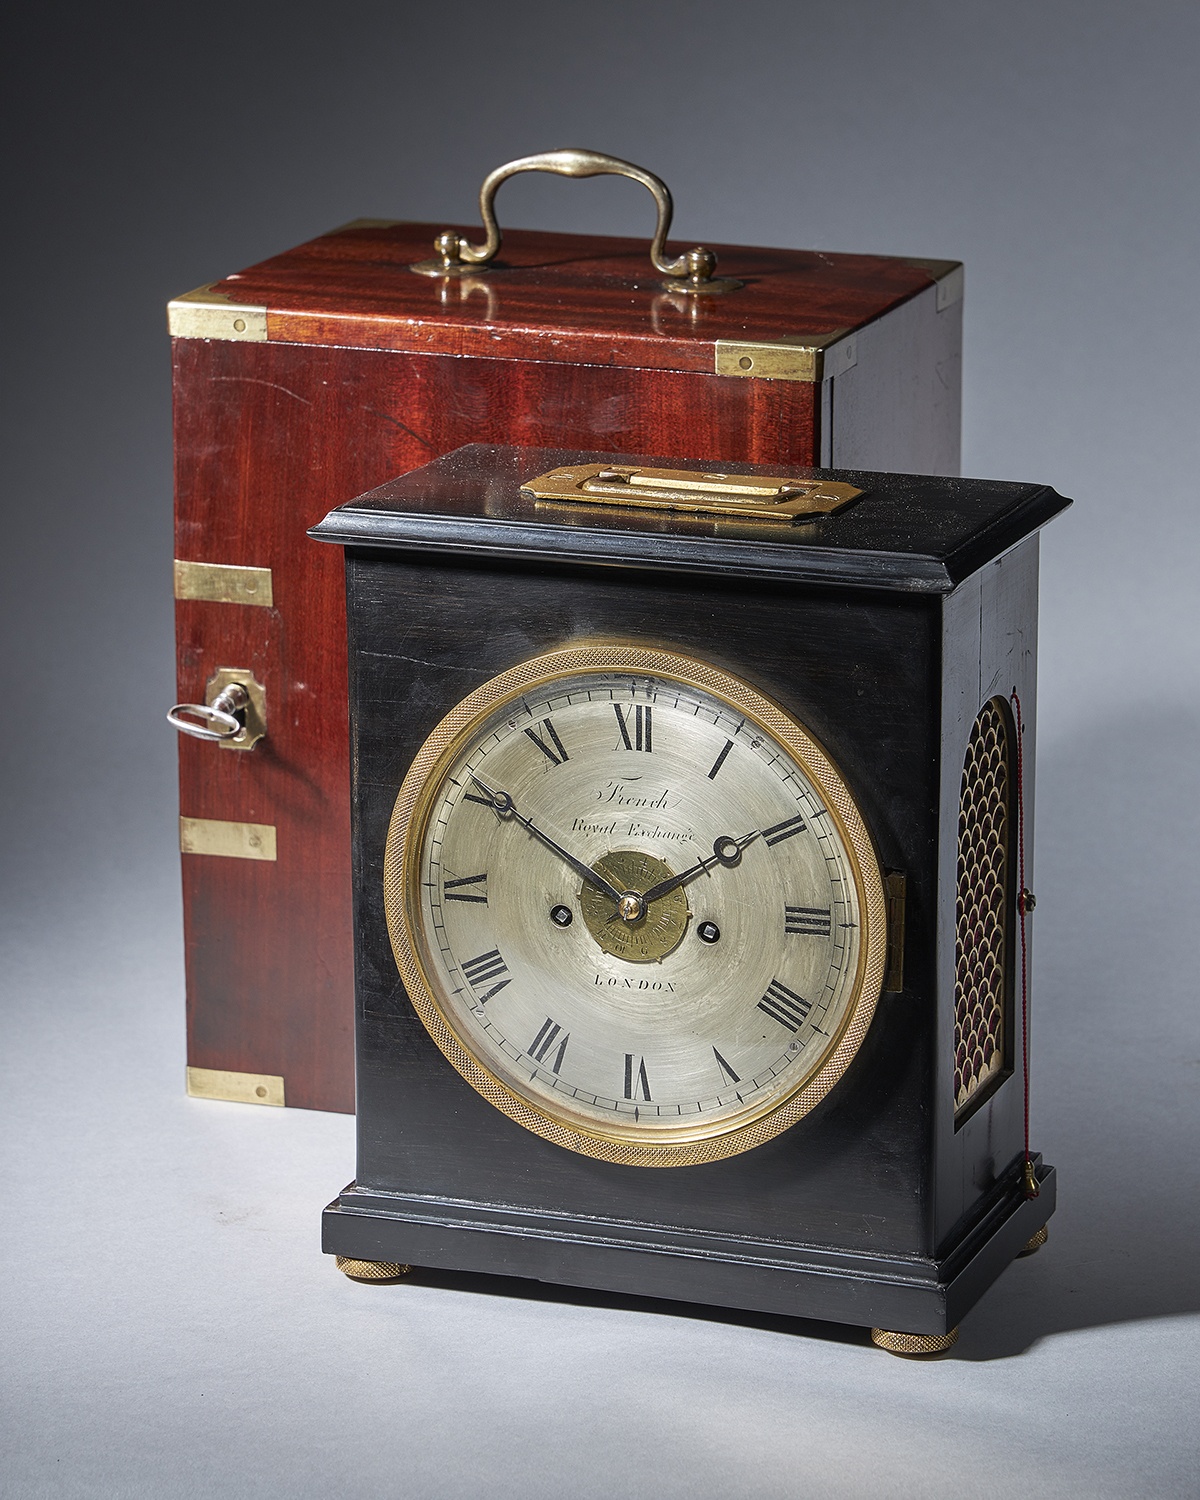 A unique early ninetieth-century travelling clock signed French Royal Exchange LONDON 1